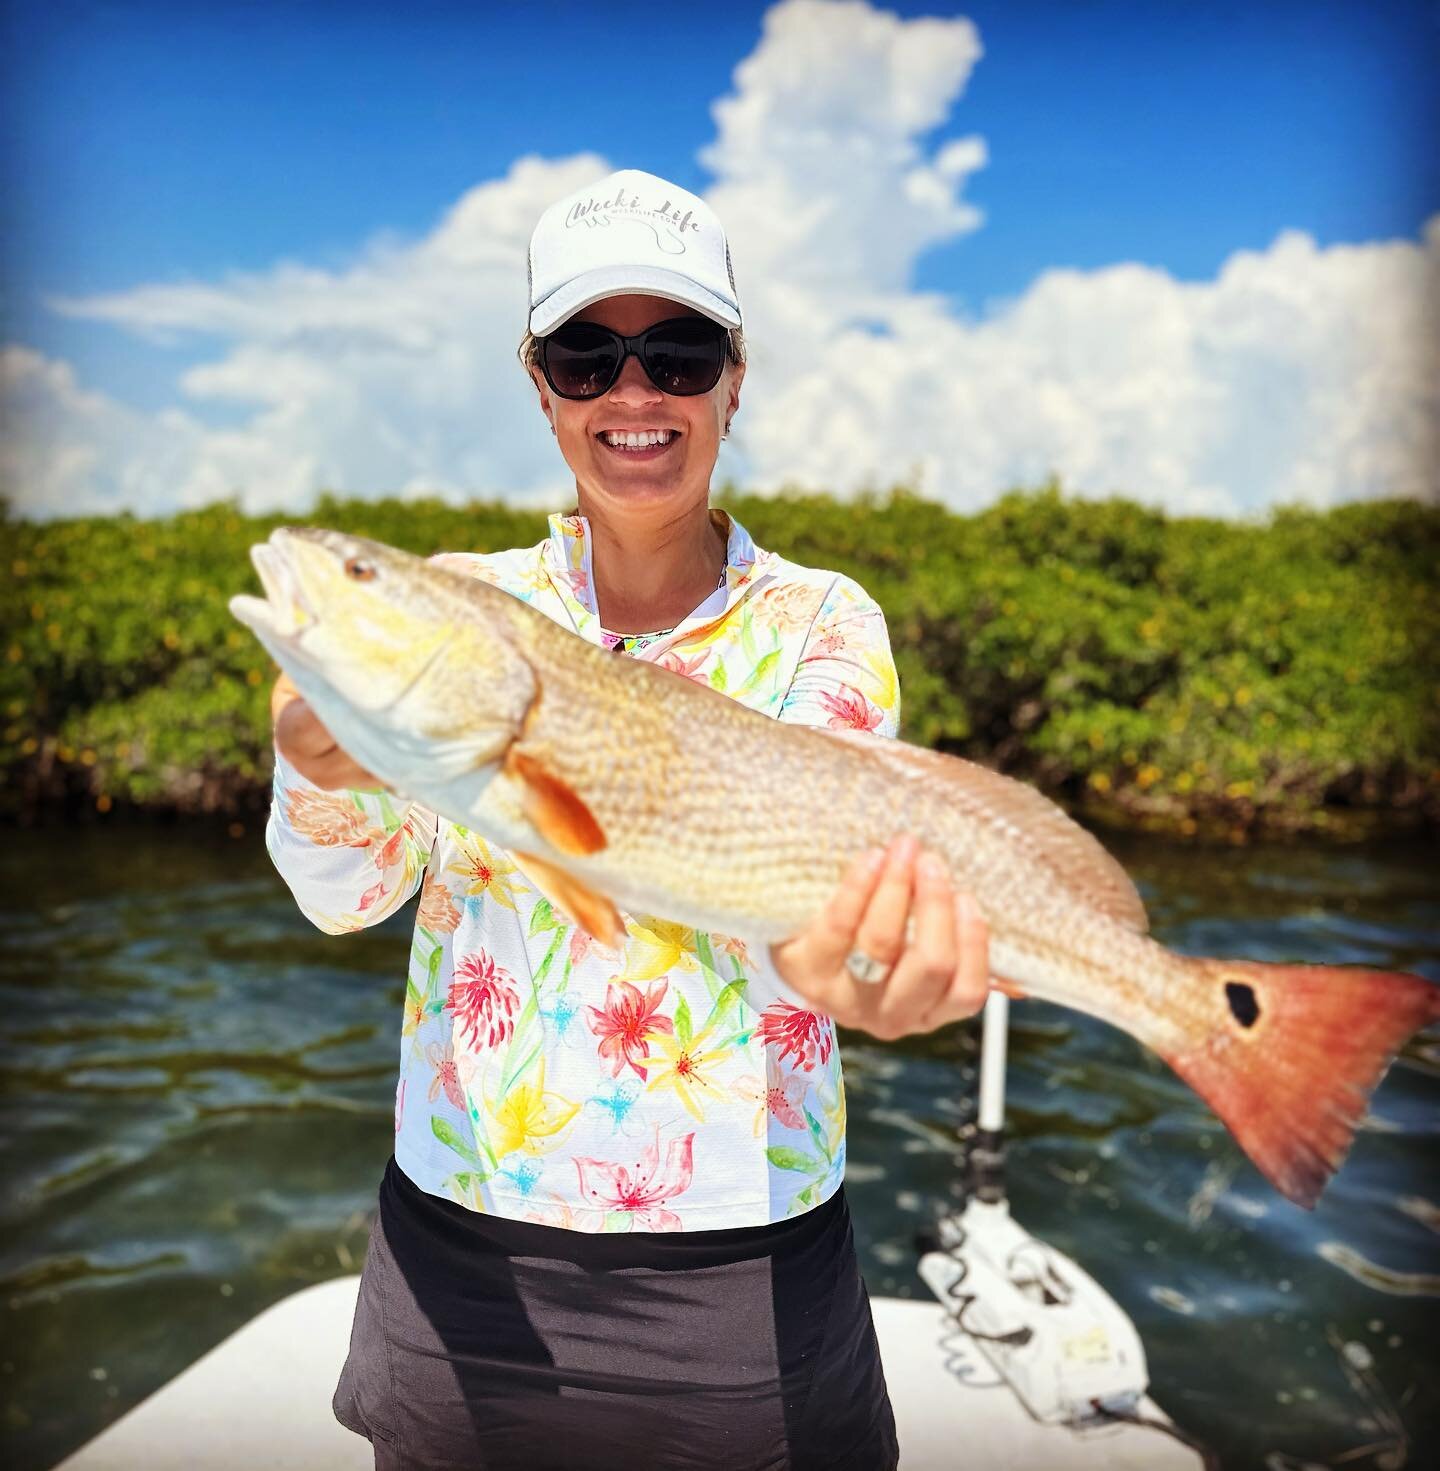 Ms Dawn with a big red from yesterdays trip. #crystalriver #captjameskerr
#crystalriverflatsfishing #fishing #naturecoast #seatrout #snook  #visitflorida #sodiumfishinggear #crystalriverfishing #inshorefishing #redfish 

www.crystalriverflatsfishing.